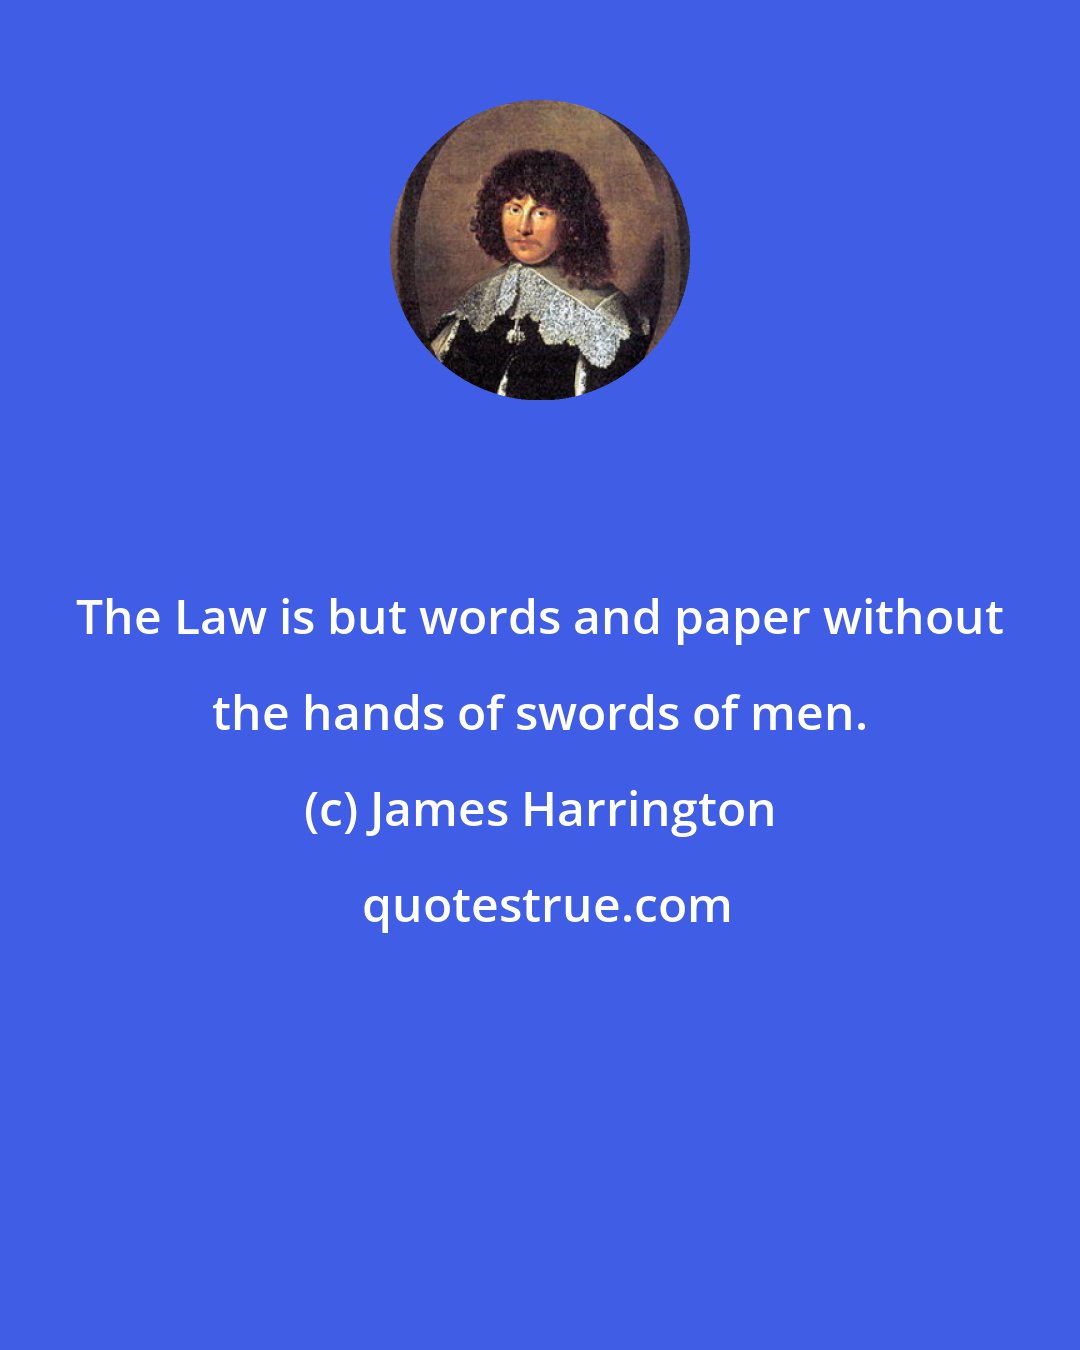 James Harrington: The Law is but words and paper without the hands of swords of men.